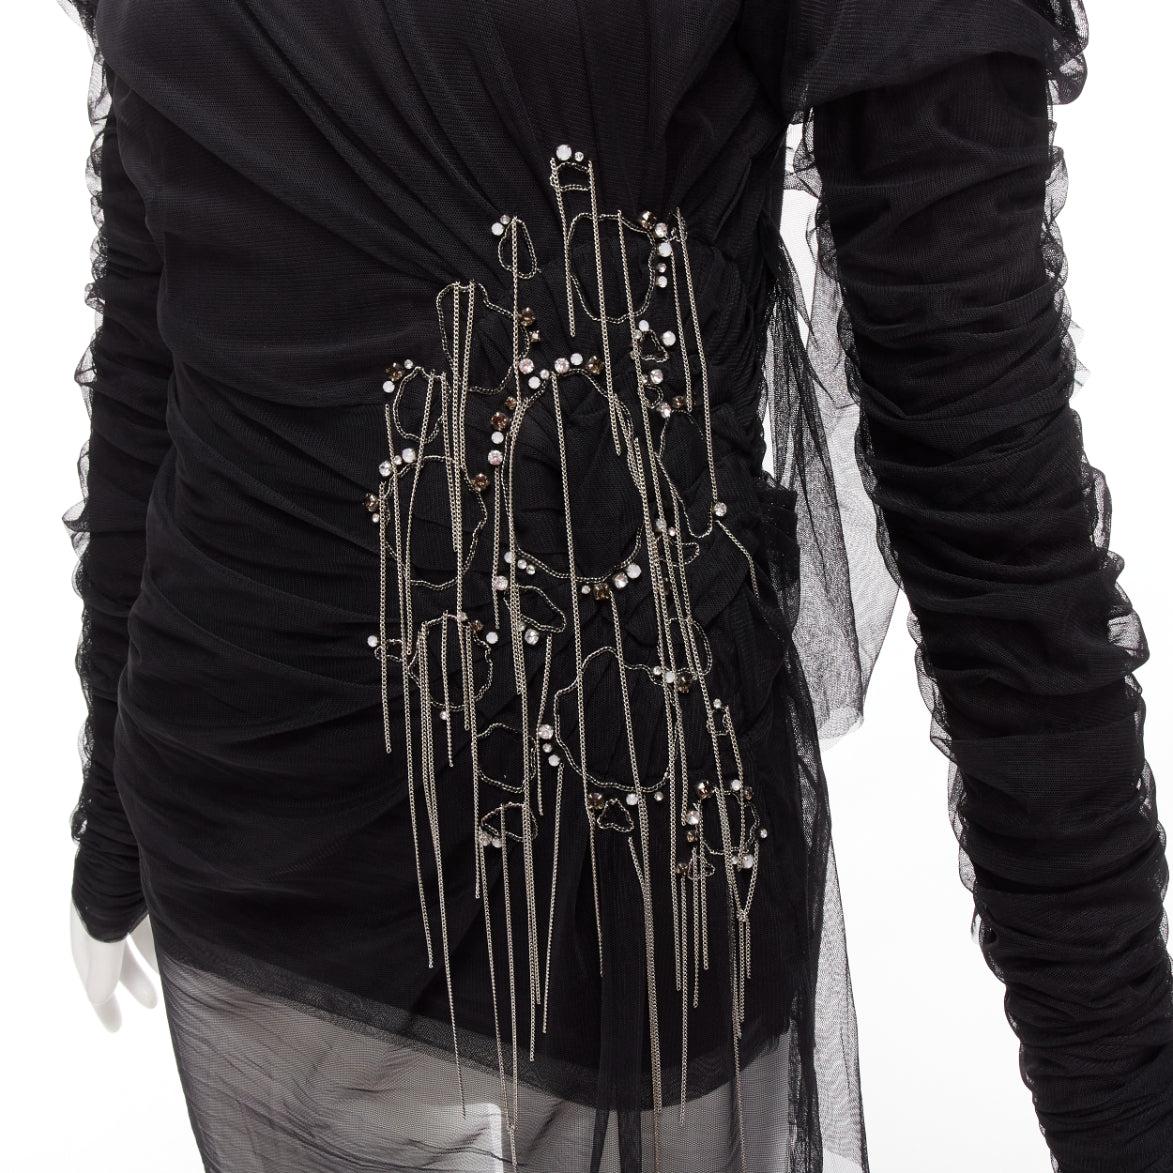 FAITH CONNEXION black viscose mesh overlay silver chain crystal top S
Reference: AAWC/A01126
Brand: Faith Connexion
Material: Viscose
Color: Black, Silver
Pattern: Chain
Closure: Pullover
Lining: Black Viscose
Made in: India

CONDITION:
Condition: